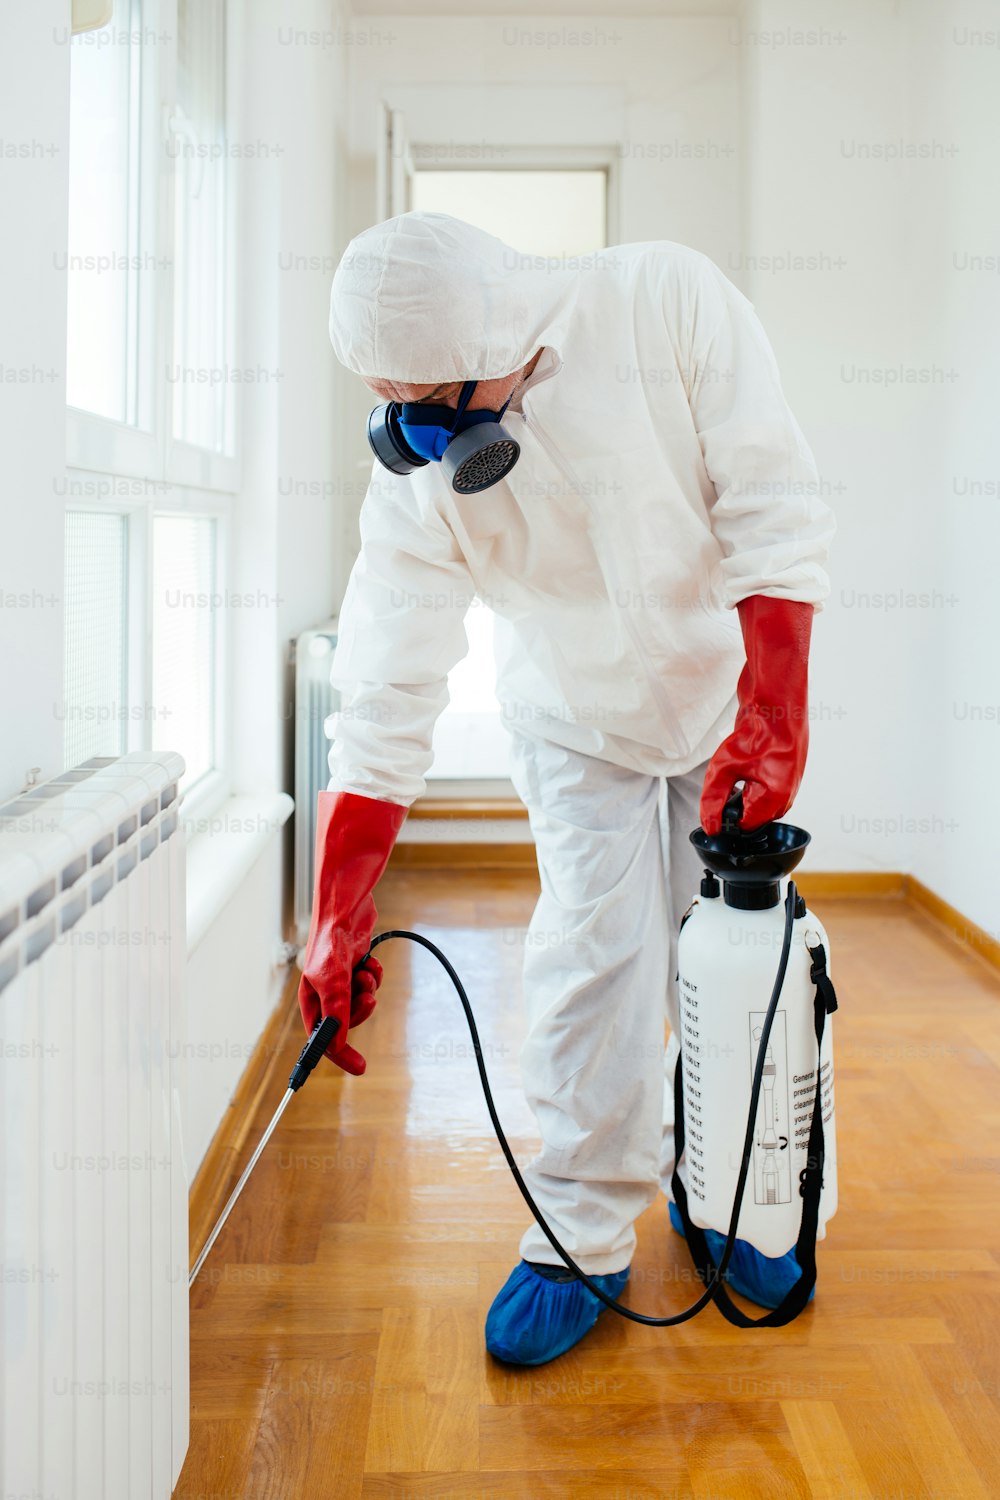 Exterminator in work wear spraying pesticide or insecticide with sprayer